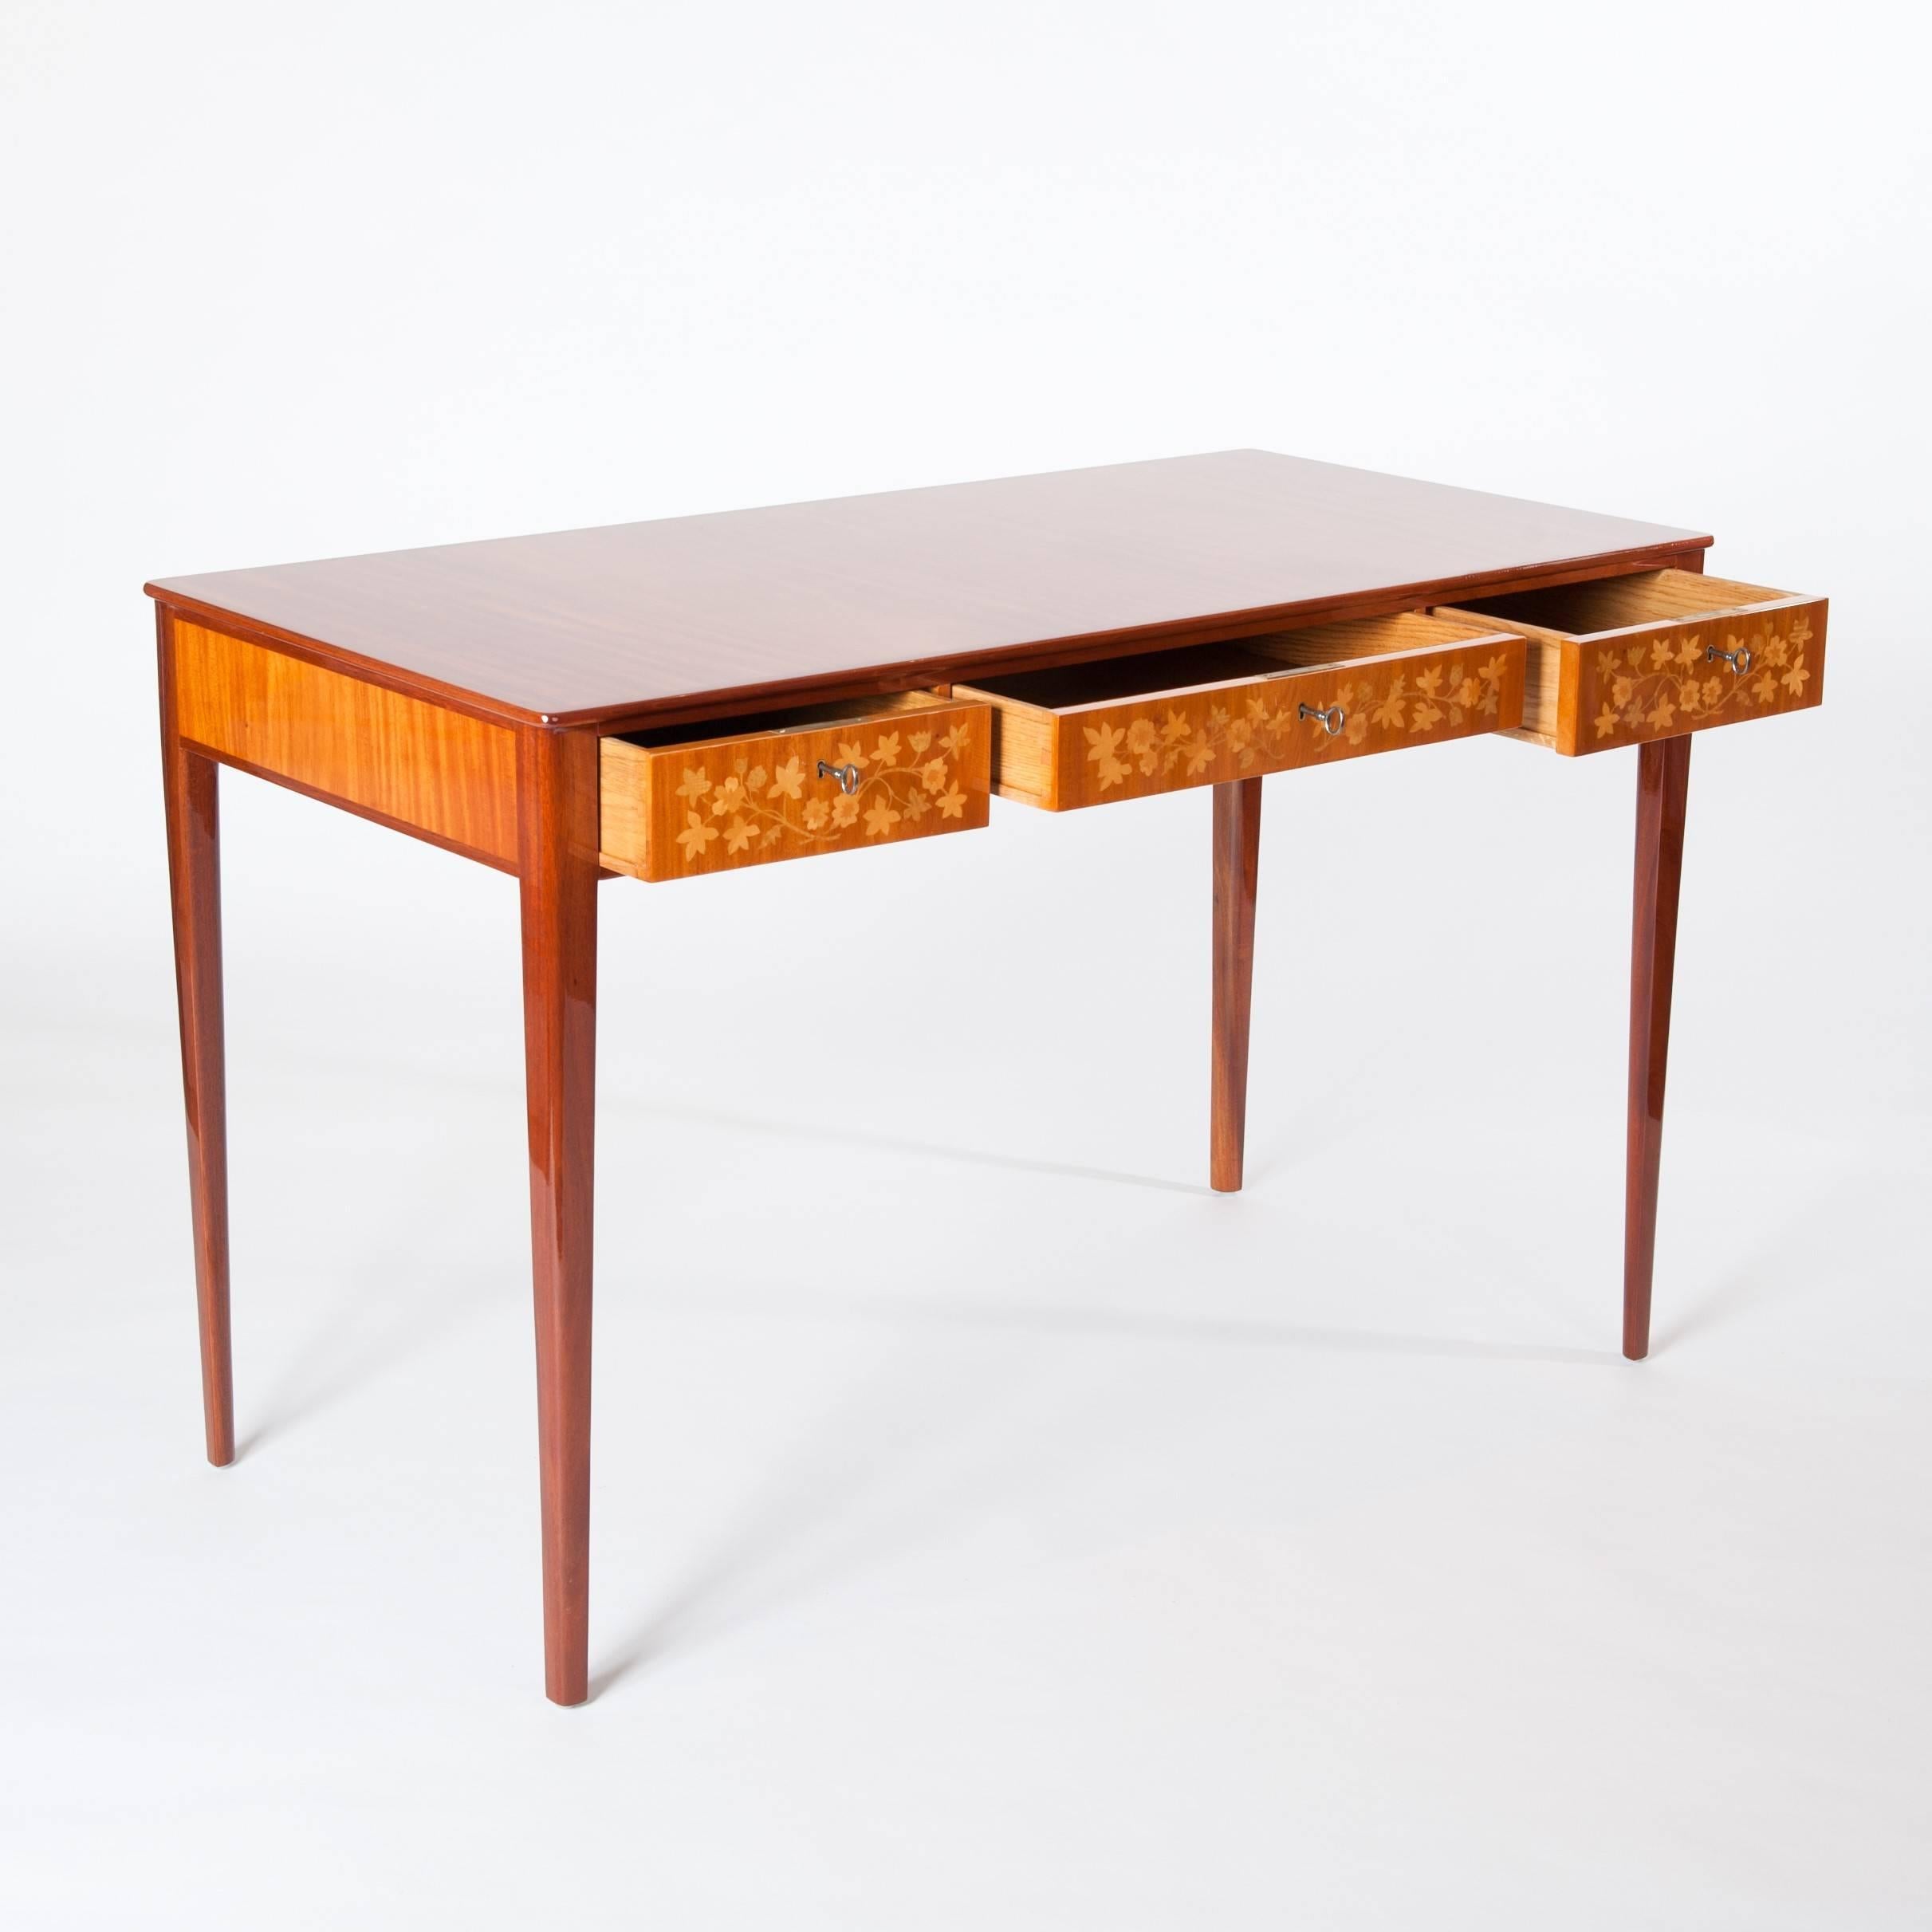 Swedish Carl Malmsten Desk Bright Mahogany Wood with Marquetry from the 1930s 2